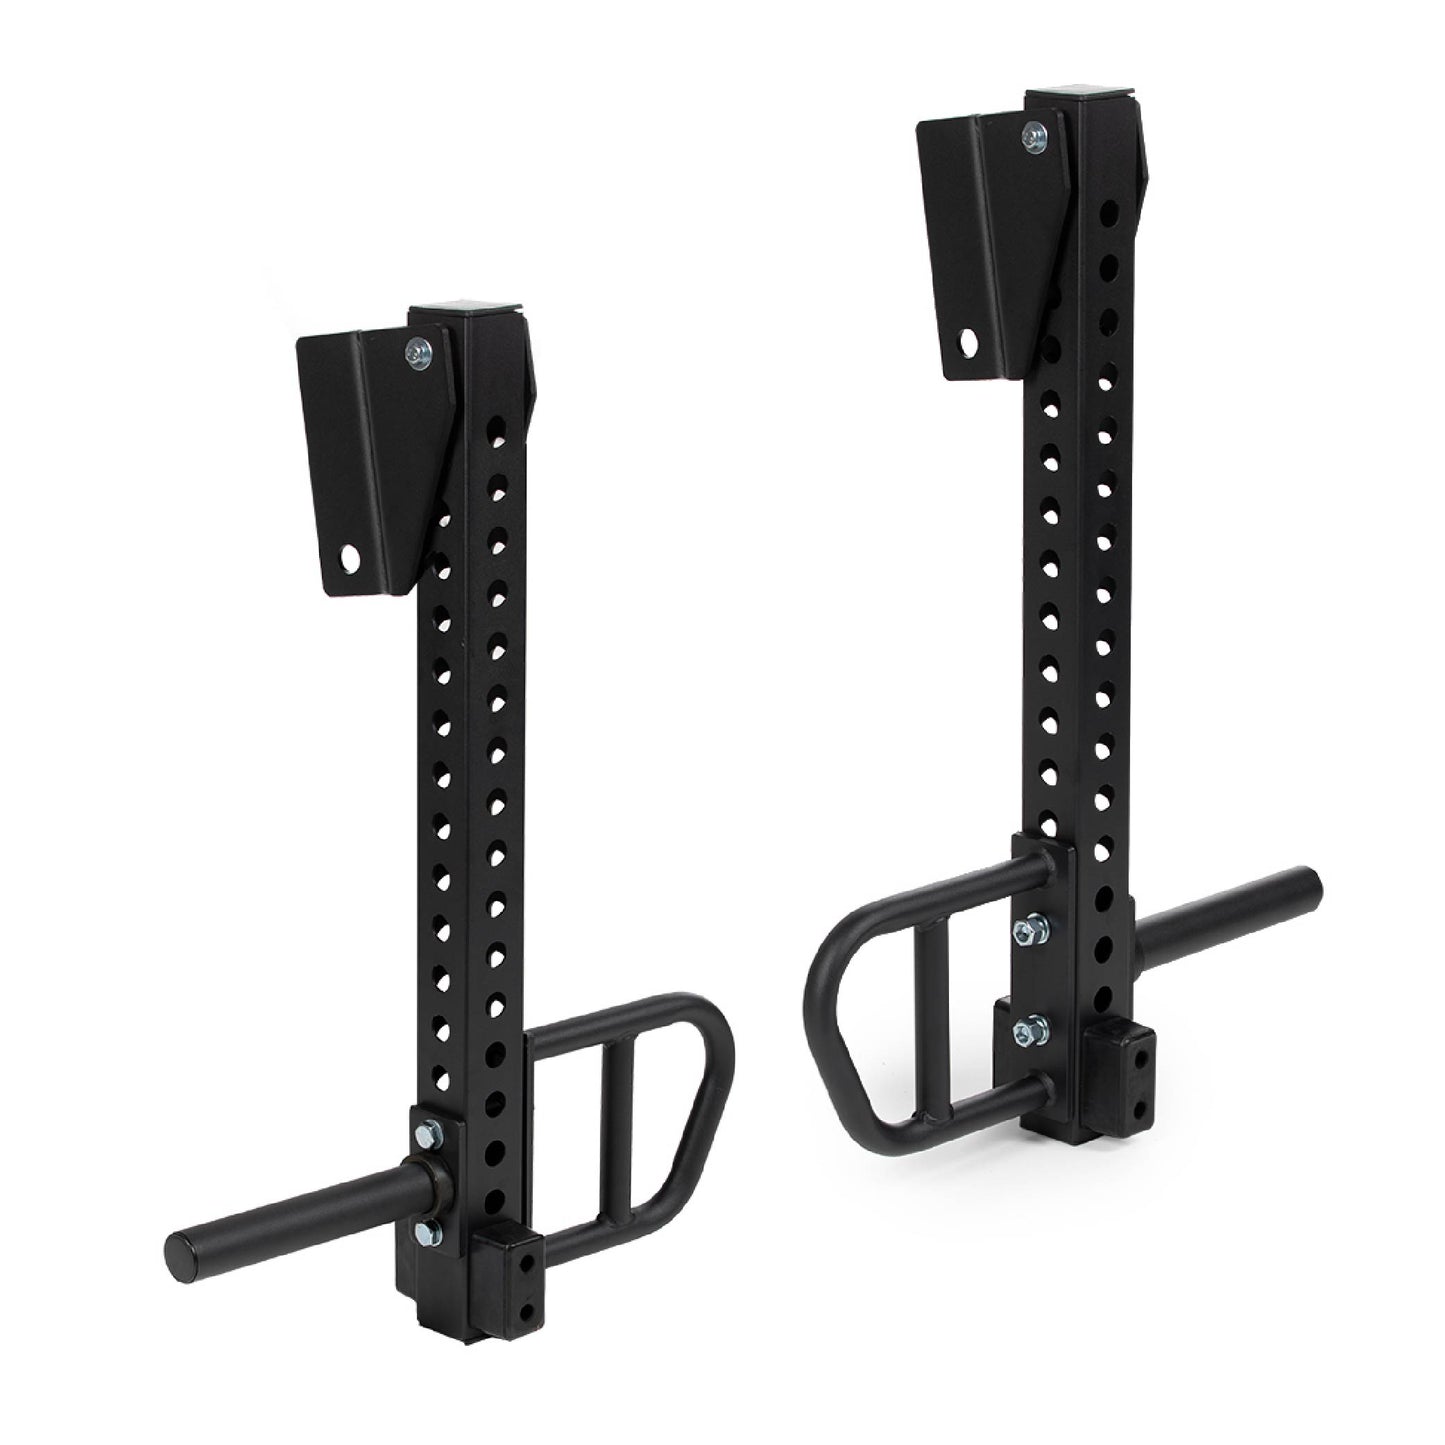 TITAN Series Adjustable Lever Arms - view 1